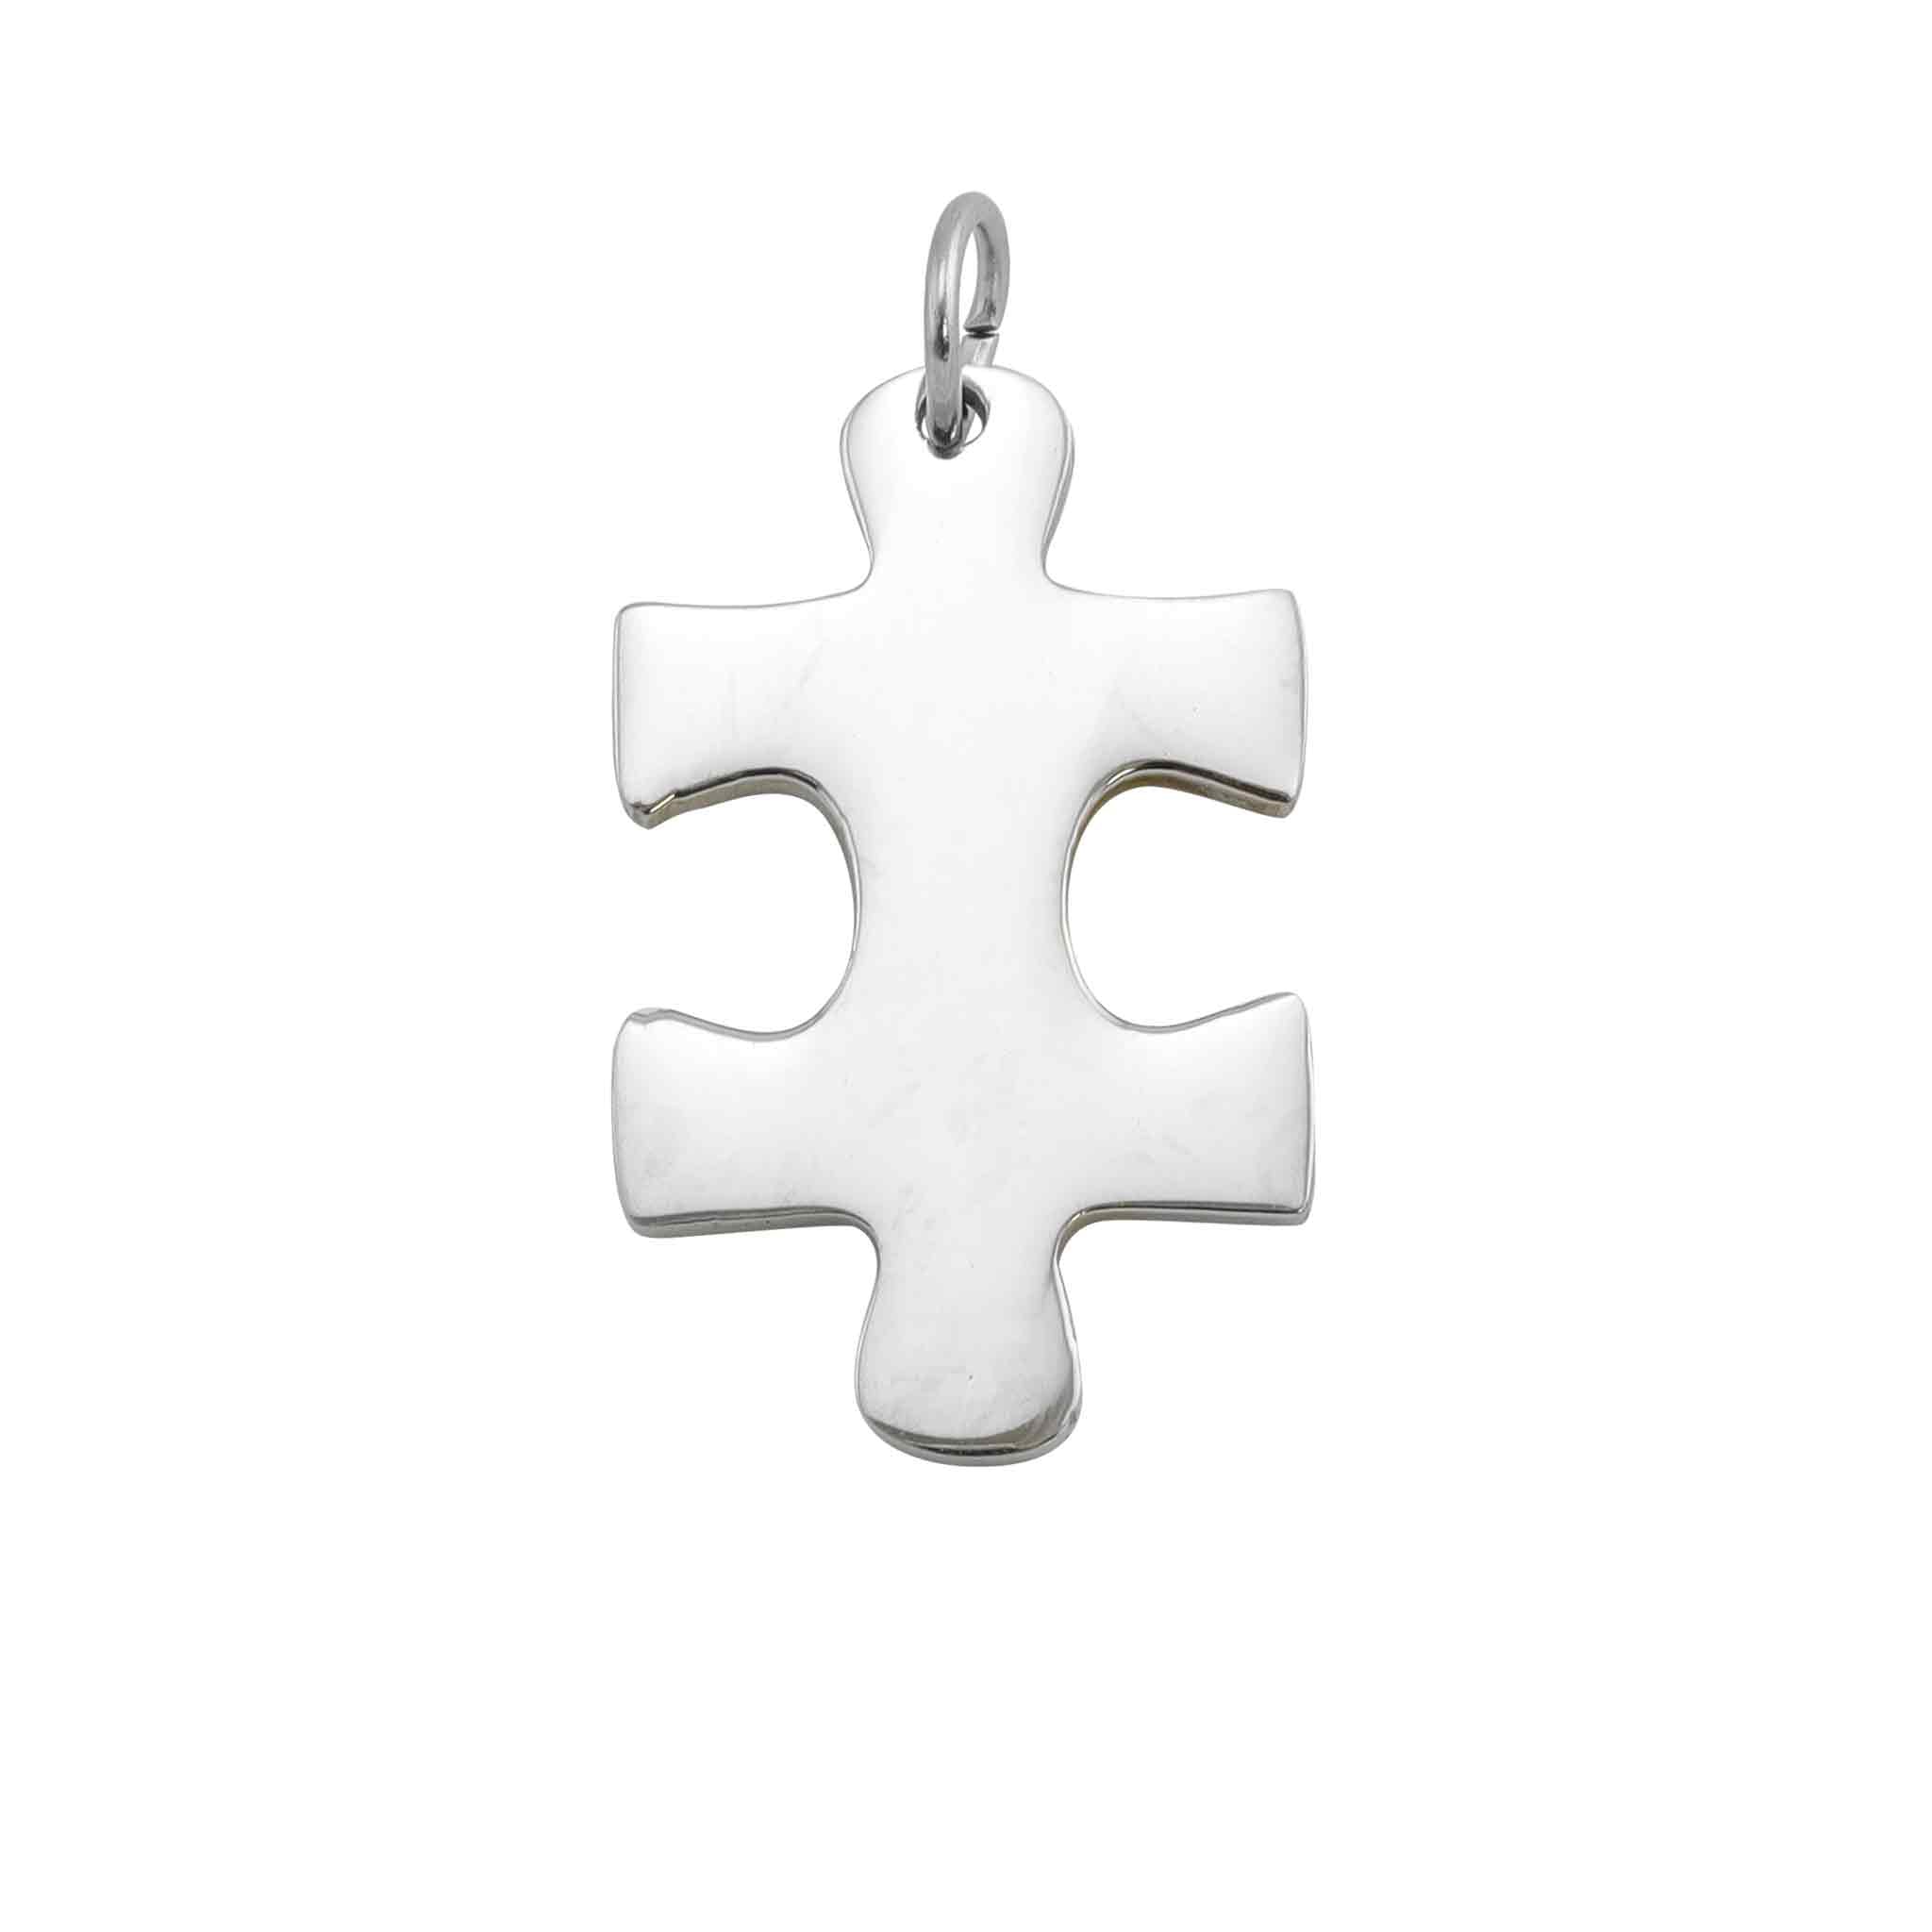 Vertical Blank Stainless Steel Puzzle Piece / SBB0044